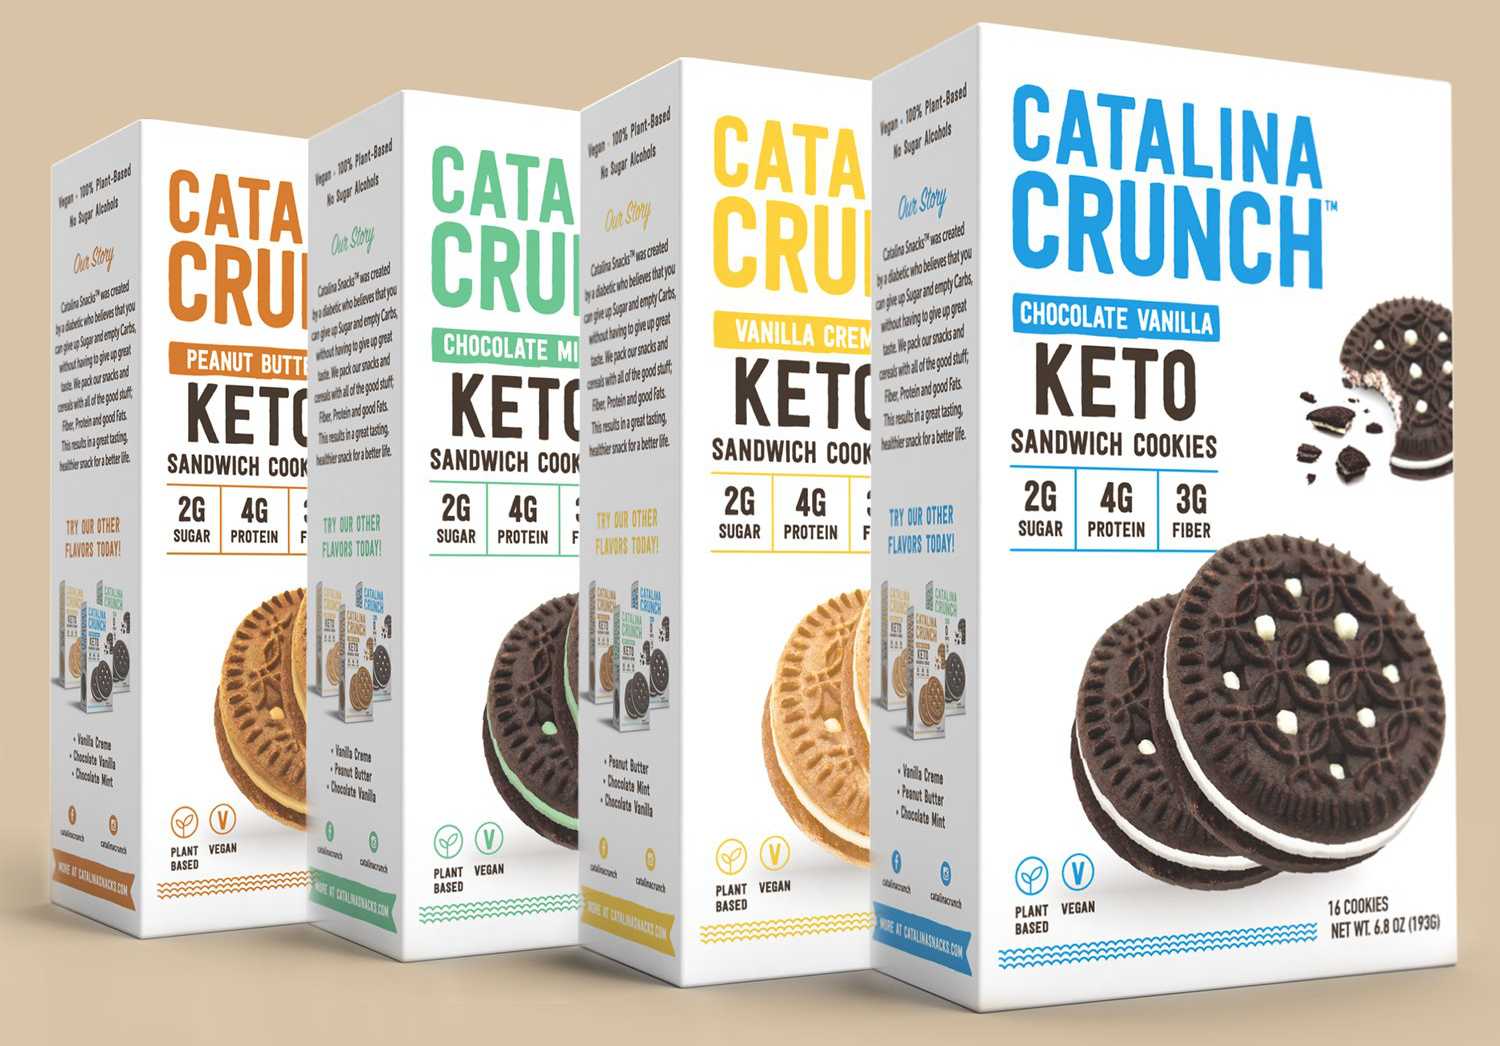 Variety of keto-friendly cookies from Catalina Crunch